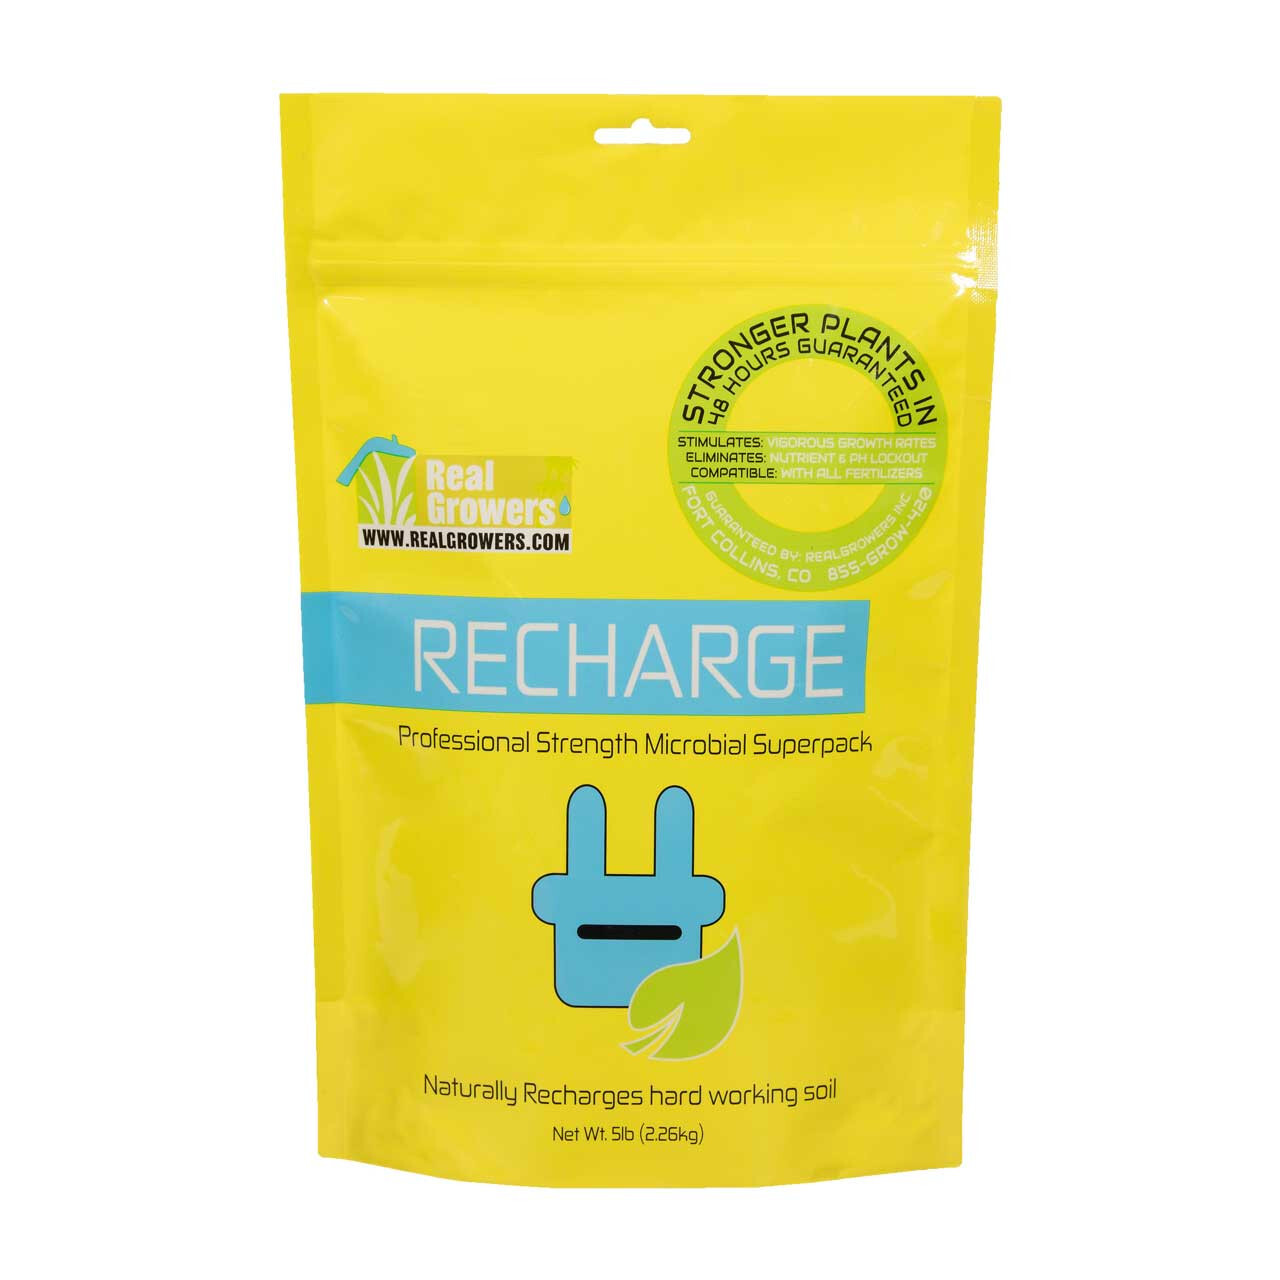 Recharge Microbial Superpack 5lbs